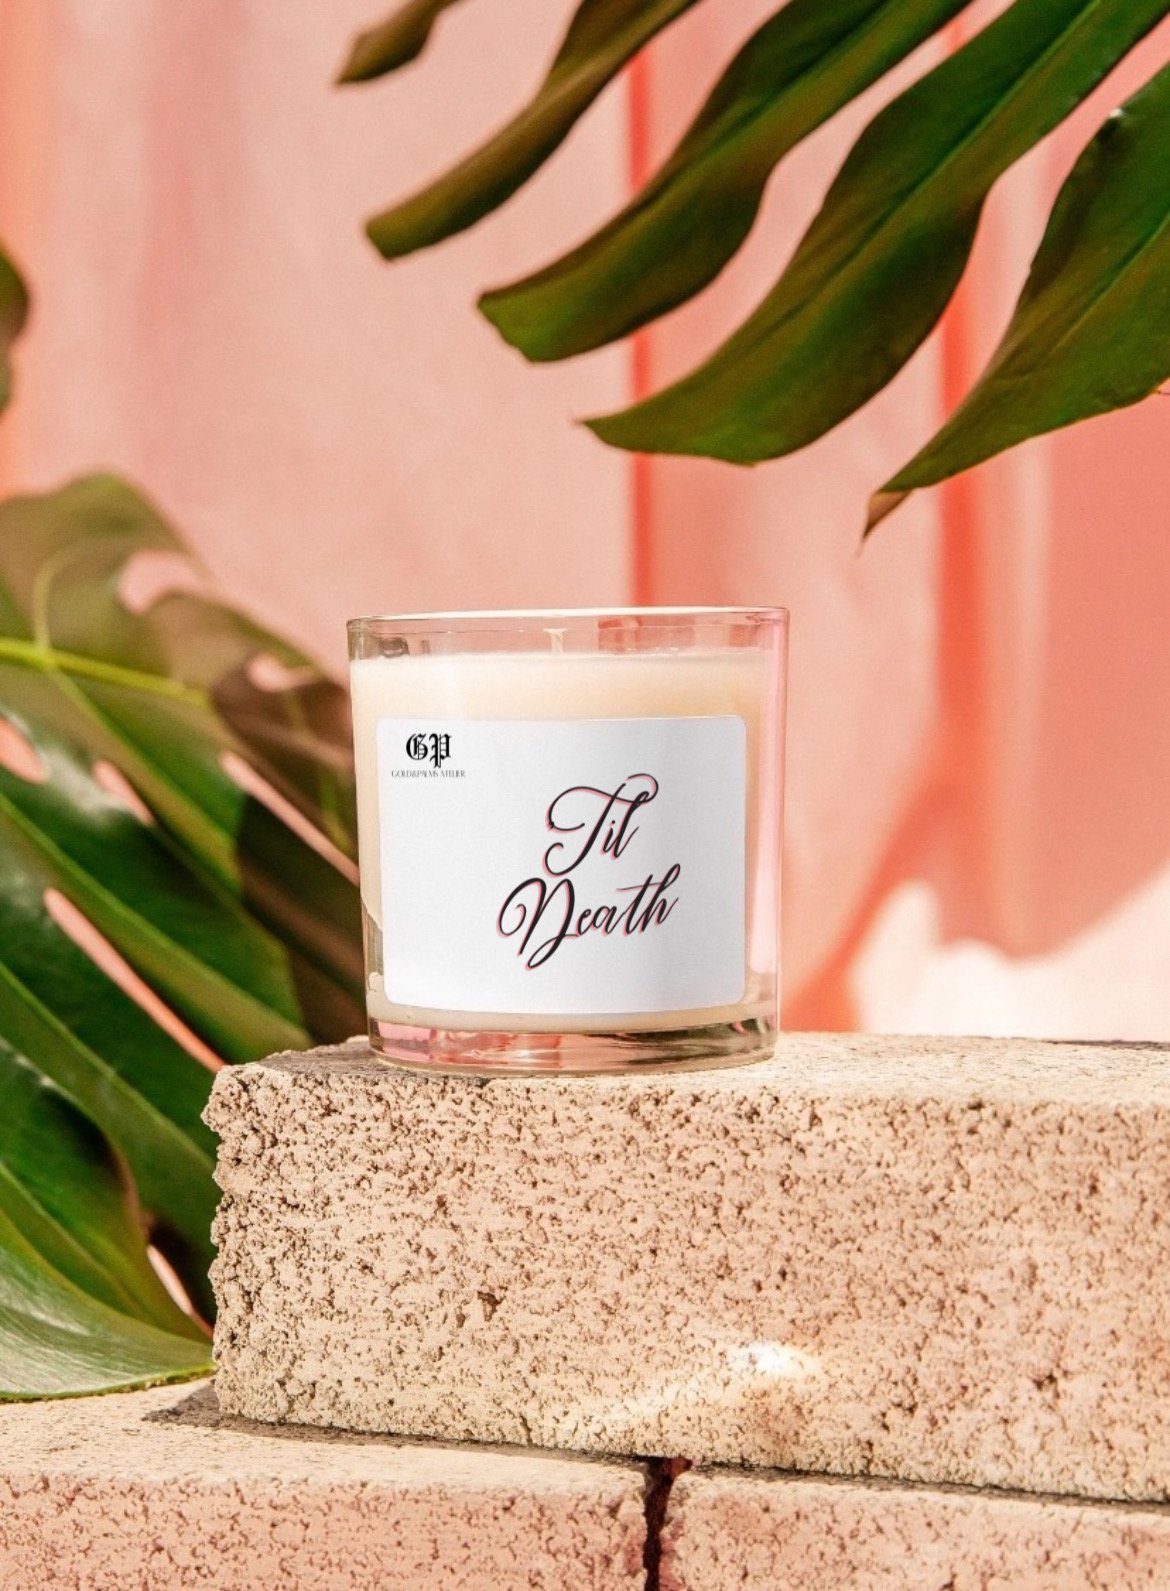 Spiced teakwood candle in clear vessel with tropical background and til death label